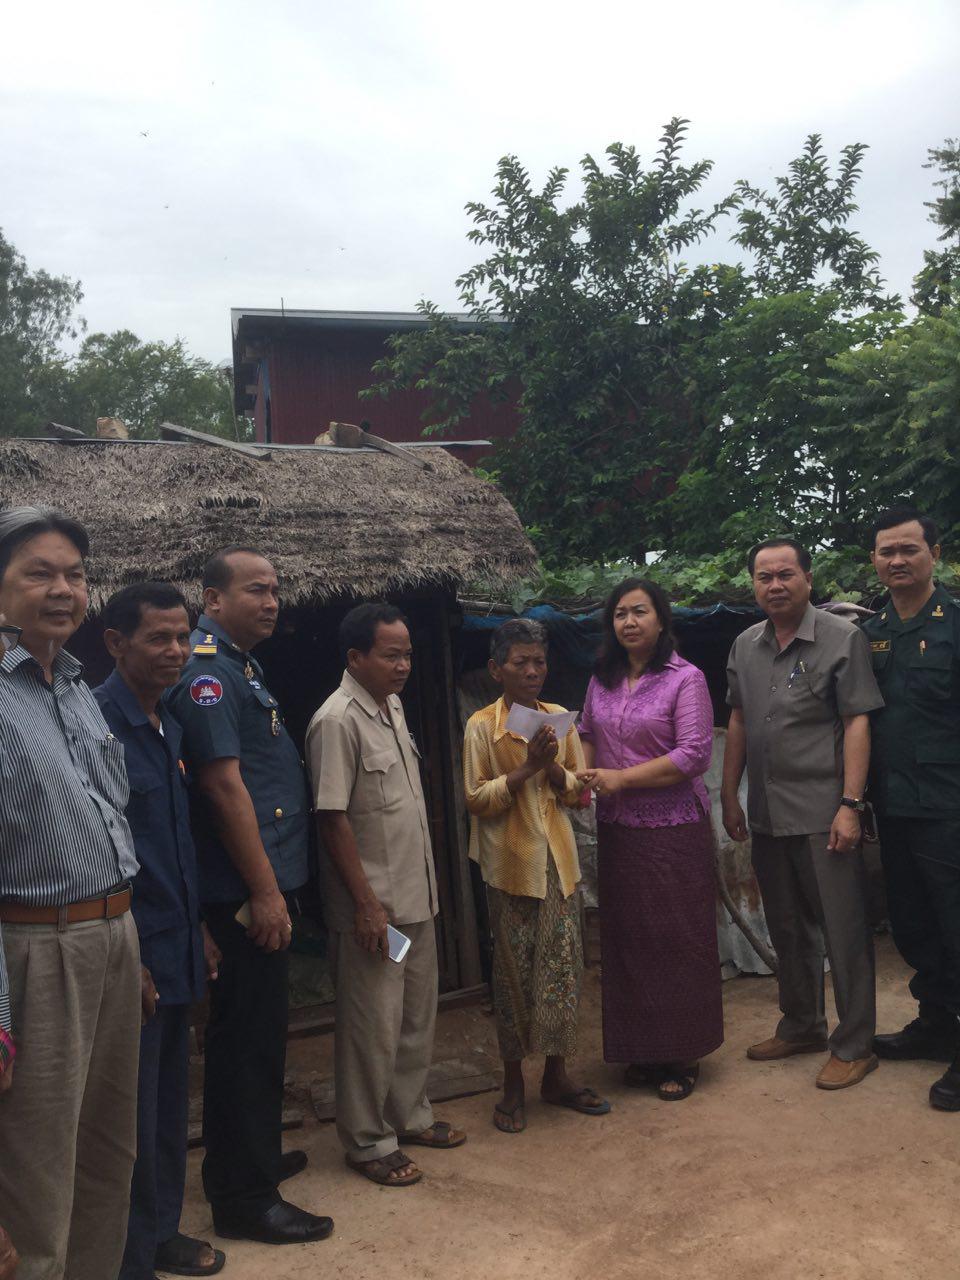 H.E. Ros Sororkha, Secretary of State of the Ministry of Posts and Telecommunications and Leader of the National Working Group for Assisting Preah Net Preah District, Banteay Meanchey Province, has led the Working Group Members to Assist People in all Nine  Communes of  Preah Net Preah District.